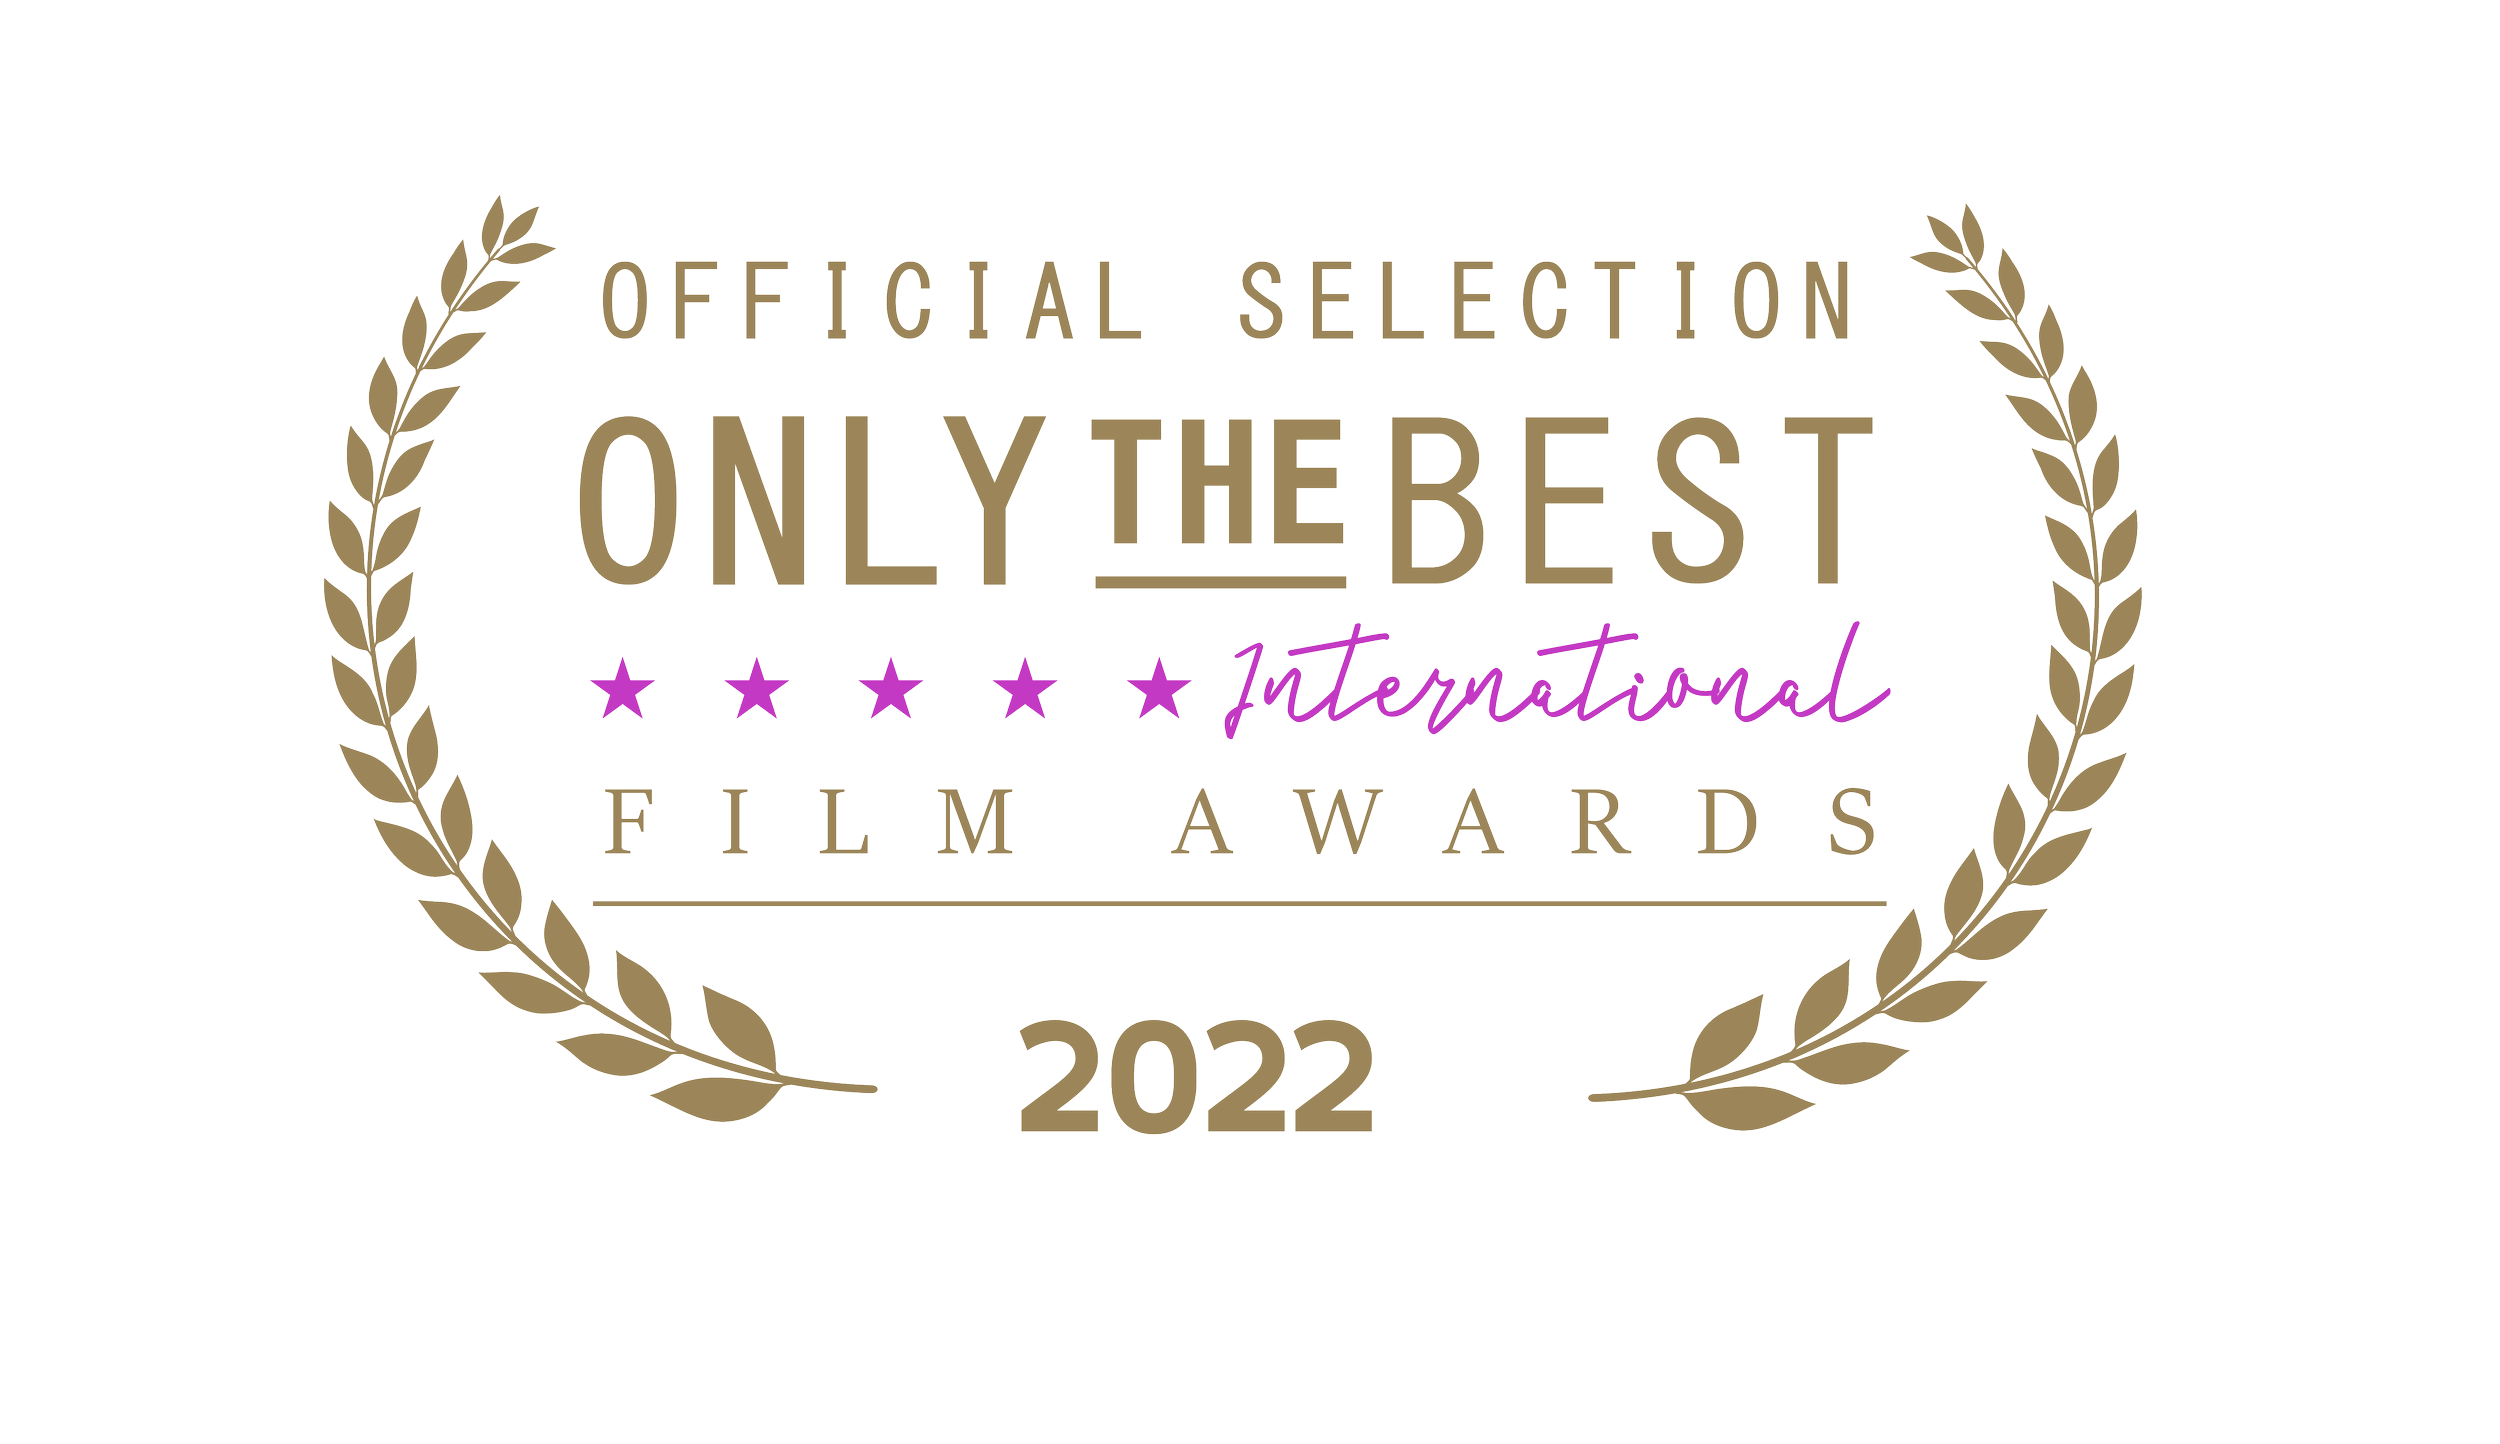 laureals_official_selection-02.png